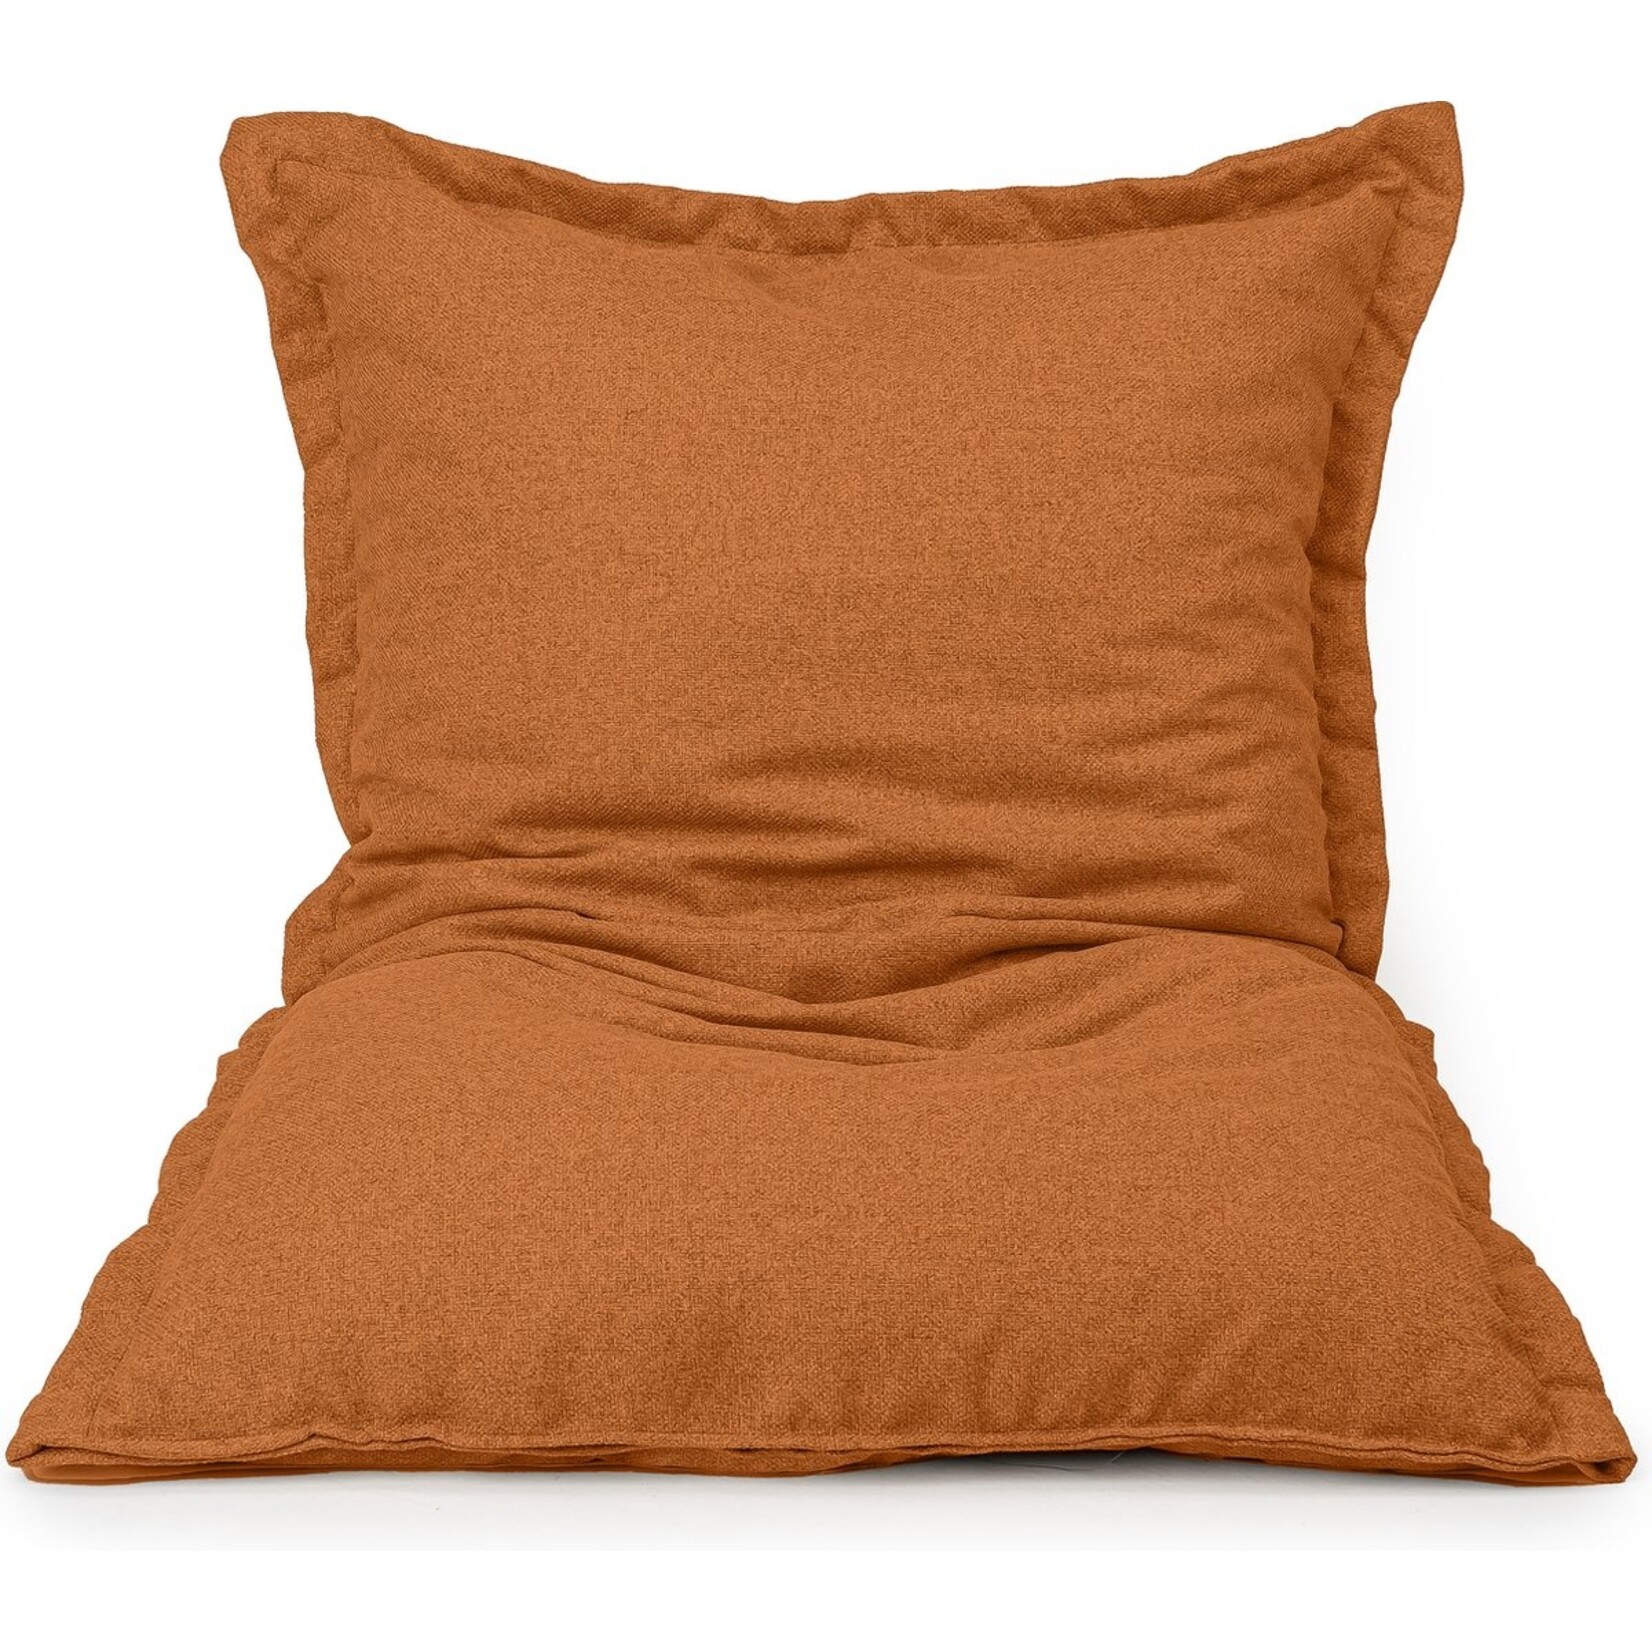 Drop & Sit - Beanbag Durable and 100% Recycled - Orange - 100x150cm - For indoor and outdoor use